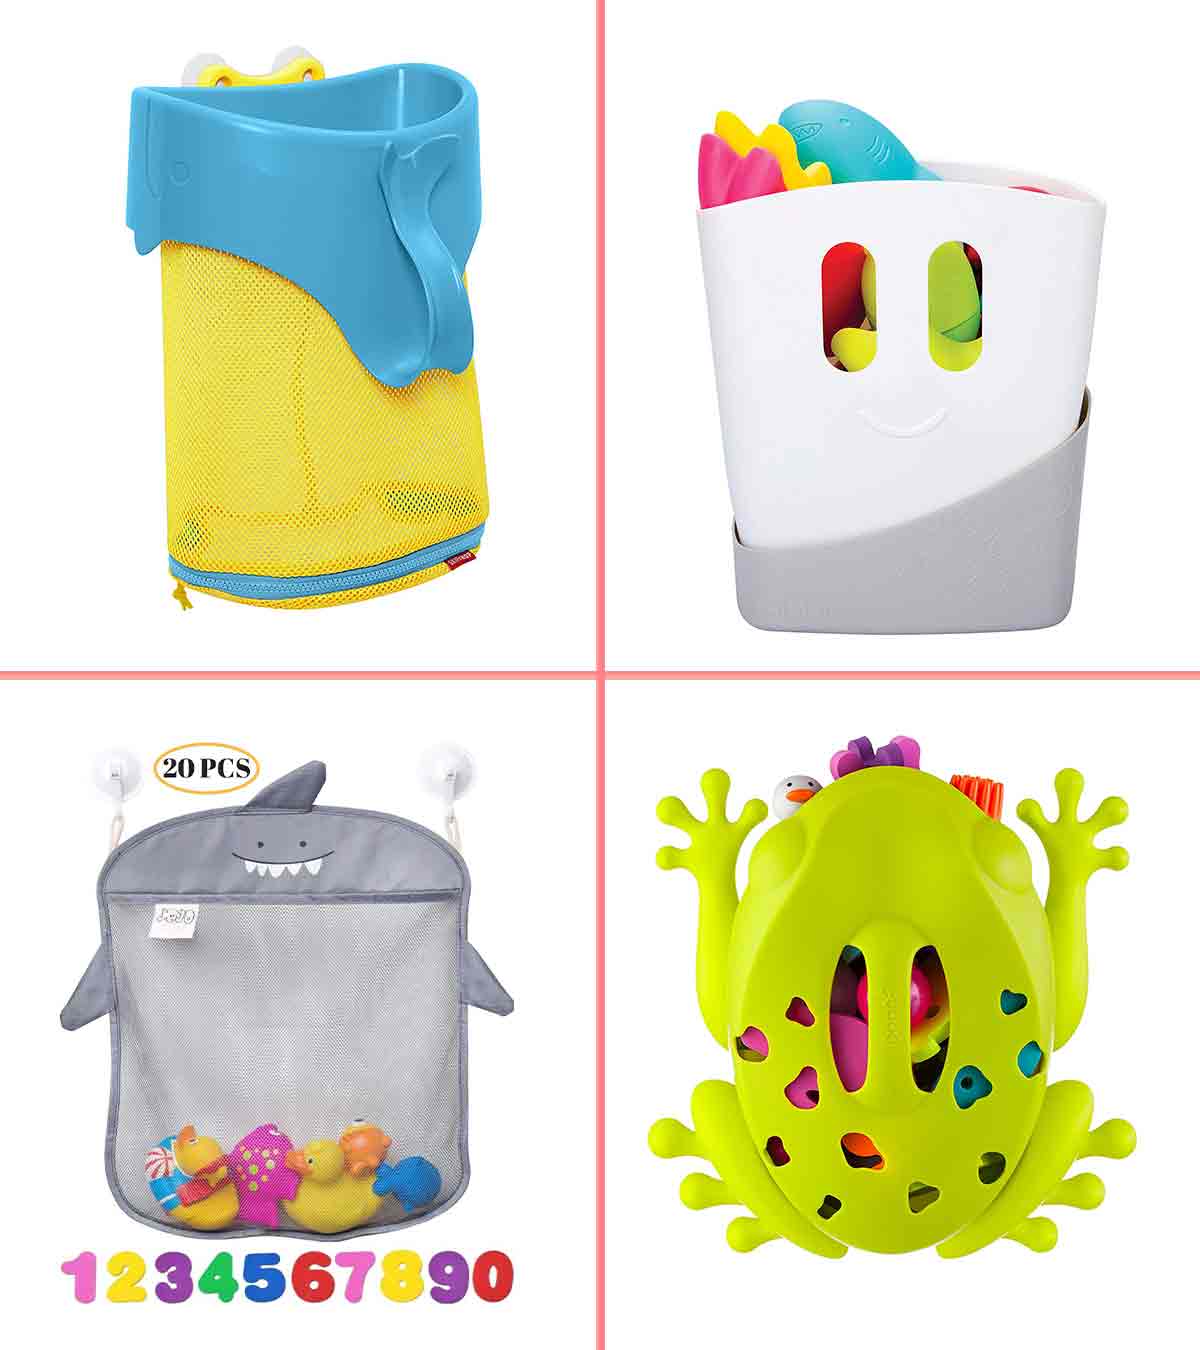 Includes 2 Extra Strong Lever Suction Hooks & 3 COMPLIMENTARY toys Bath Toy Organizer from Gladstone Kids Offers Spacious Easy Access & Mold Resistant Mesh Bag for Quick Drying & Storage Buy Now! 